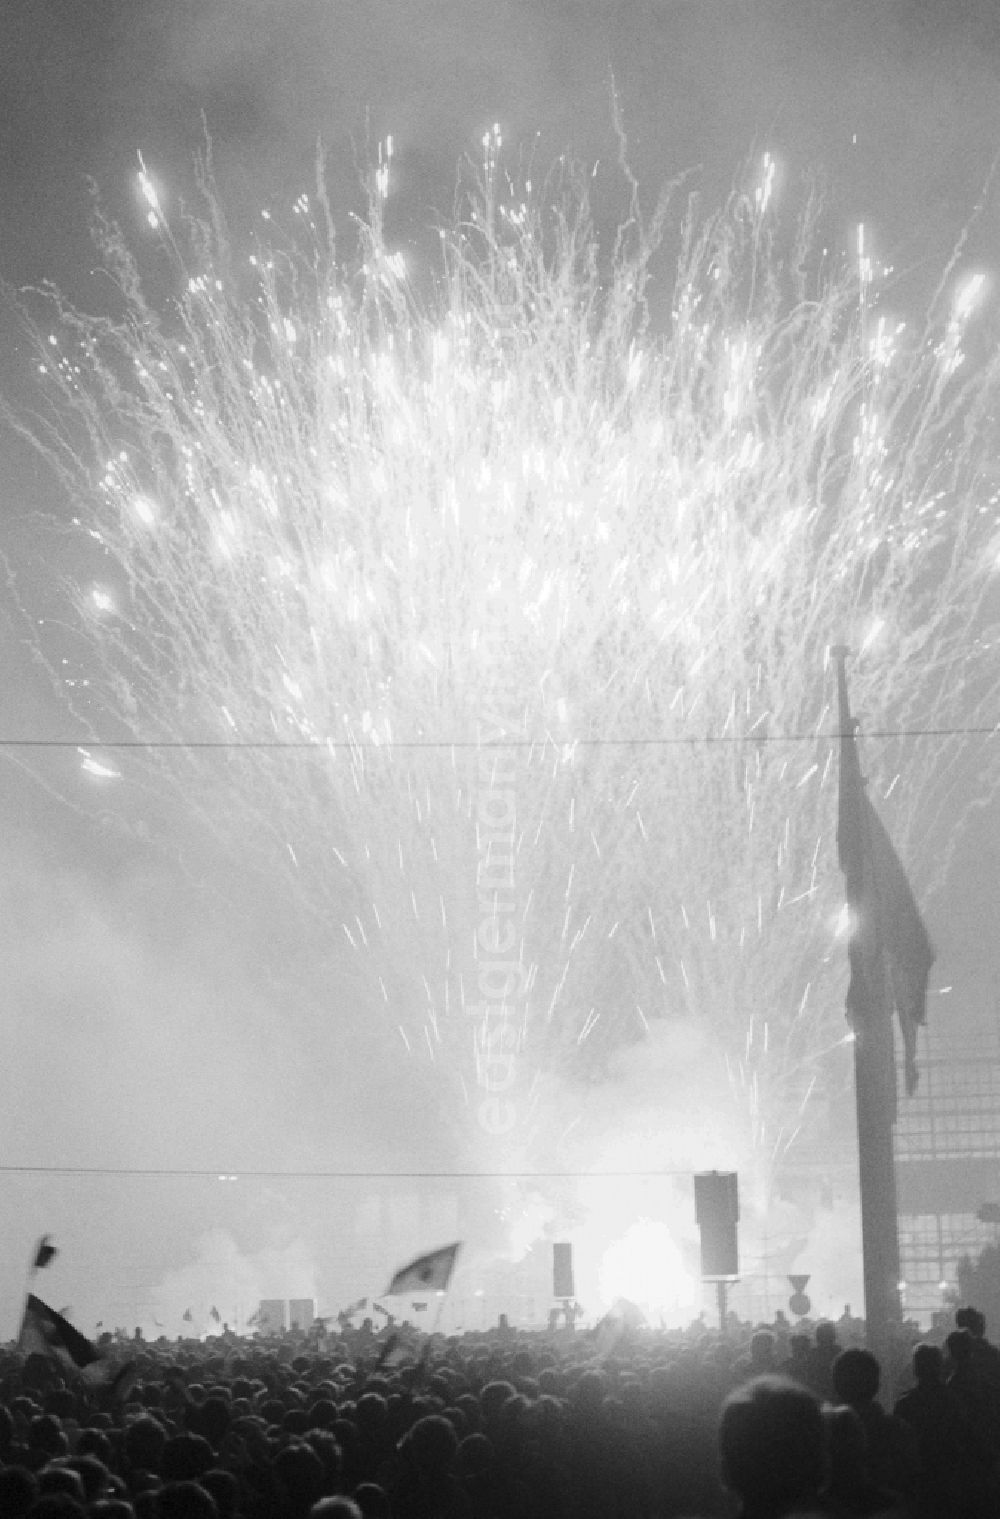 GDR image archive: Berlin - Closing ceremony and fireworks at the Marx-Engels-Platz in the Lustgarten to Pfingsttreffen the FDJ in Berlin, the former capital of the GDR, the German Democratic Republic